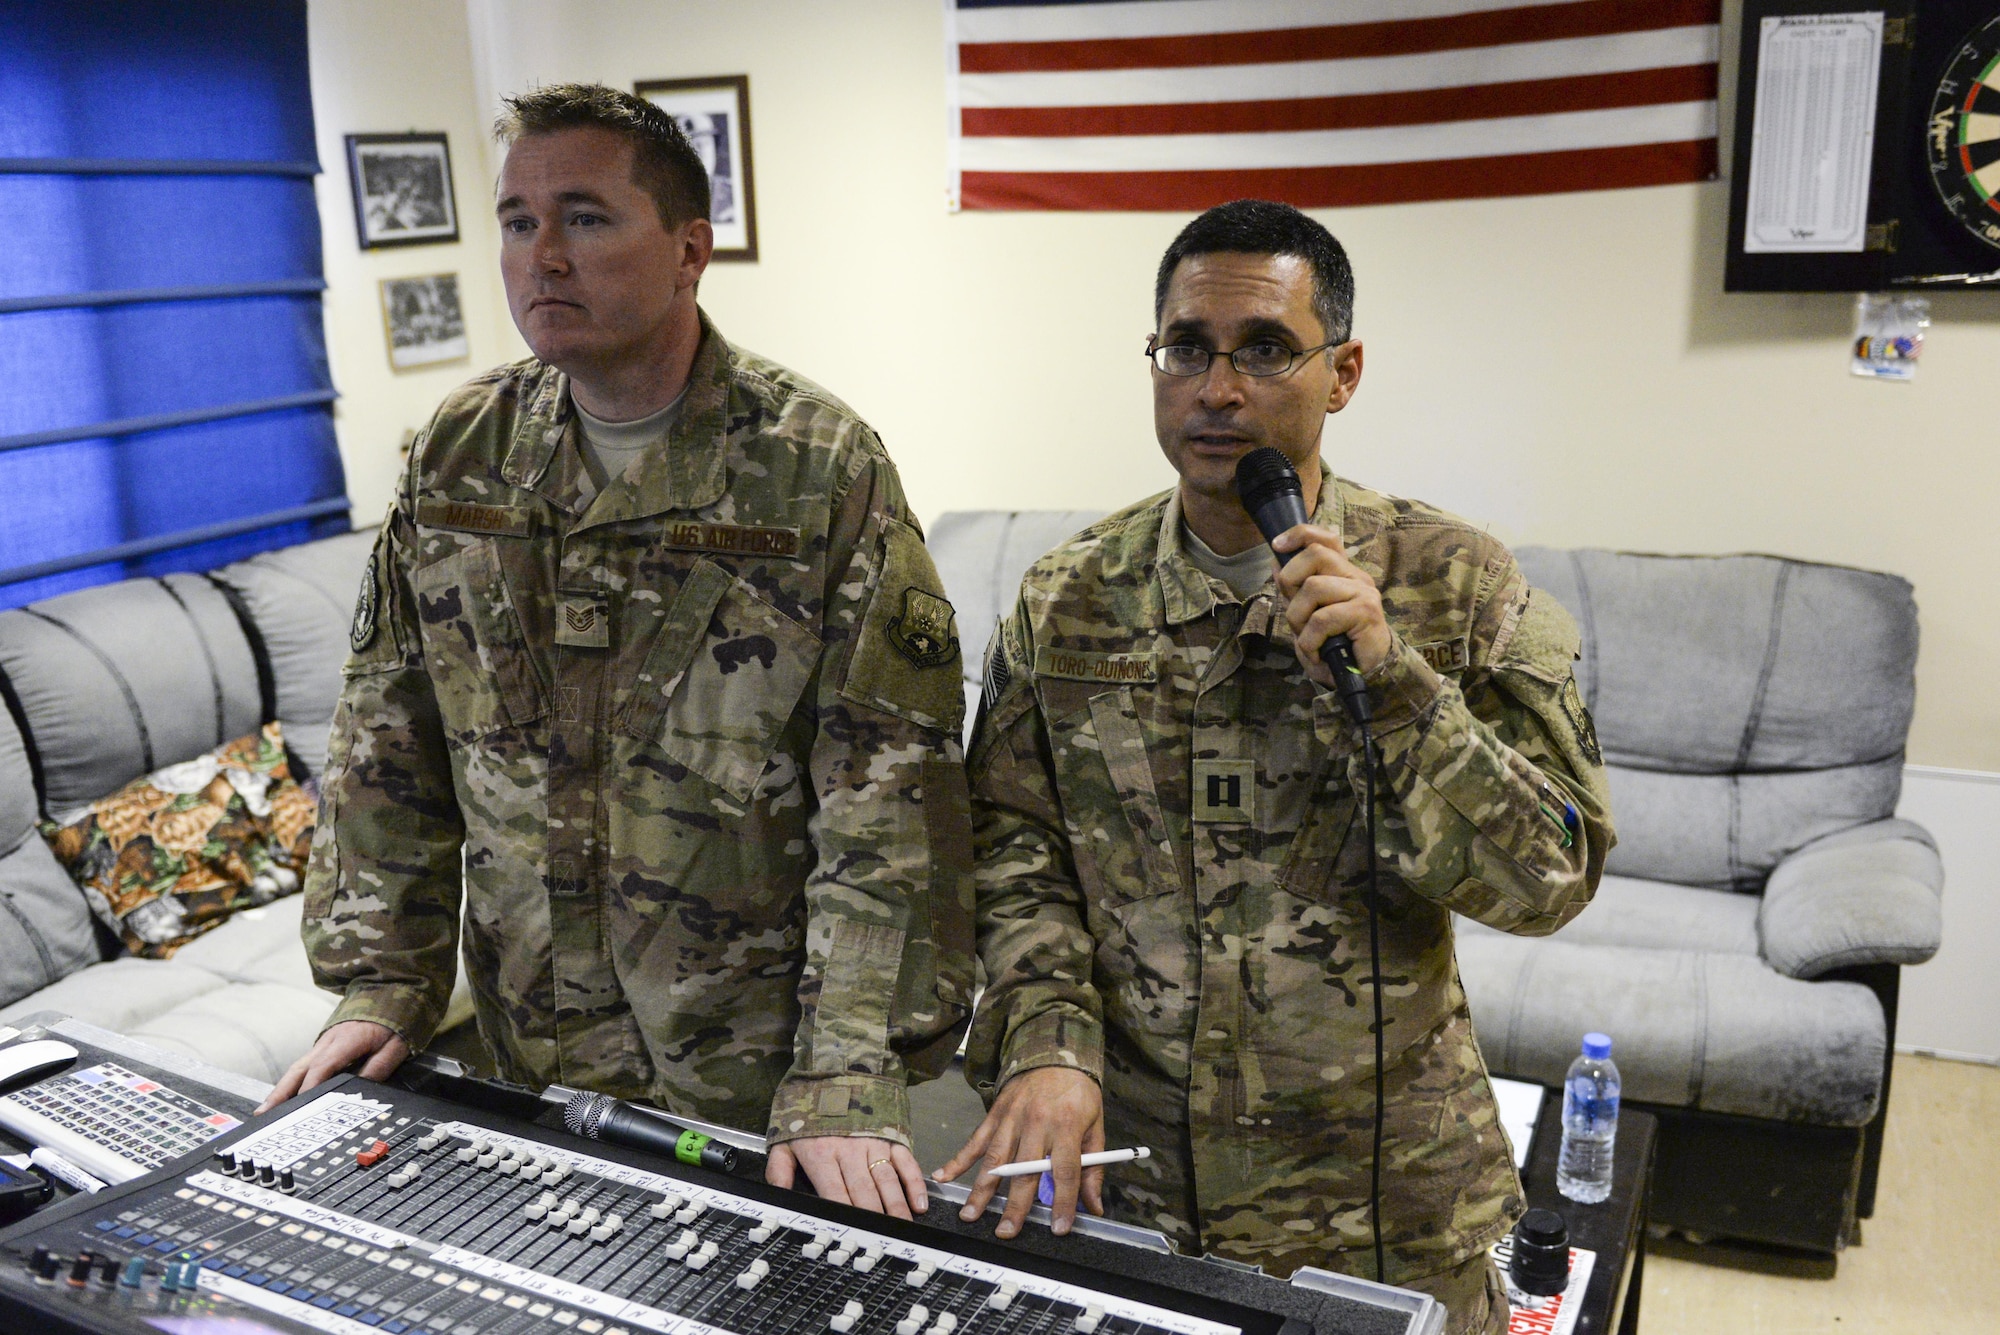 U.S. Air Force Capt. Rafael Toro-Quinones, right, officer in charge, communicates with band members recording in another building while Tech. Sgt. John Marsh, audio engineer, both assigned to the Air Force Central Command Band, Touch-n-Go, assists with the production during a recording session as the band recorded their punk rock rendition of the Air Force Song at Al Udeid, Air Force Base, Qatar, Sept. 21, 2017.